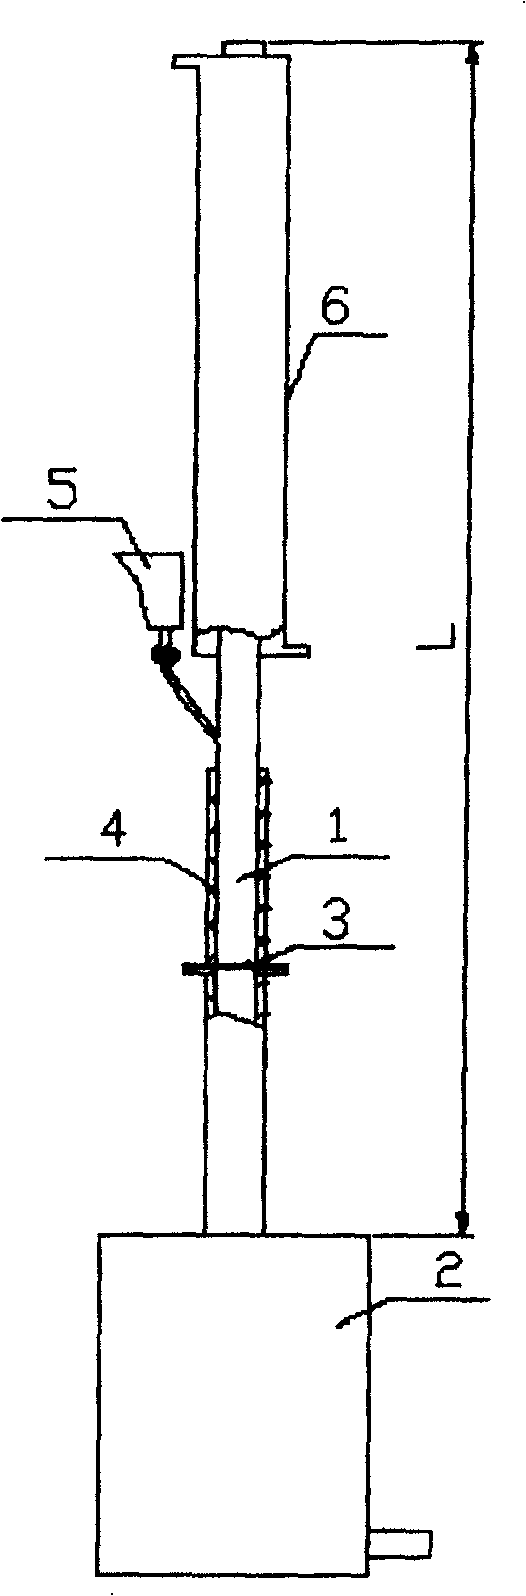 Pulsating fluid-bed combustion apparatus